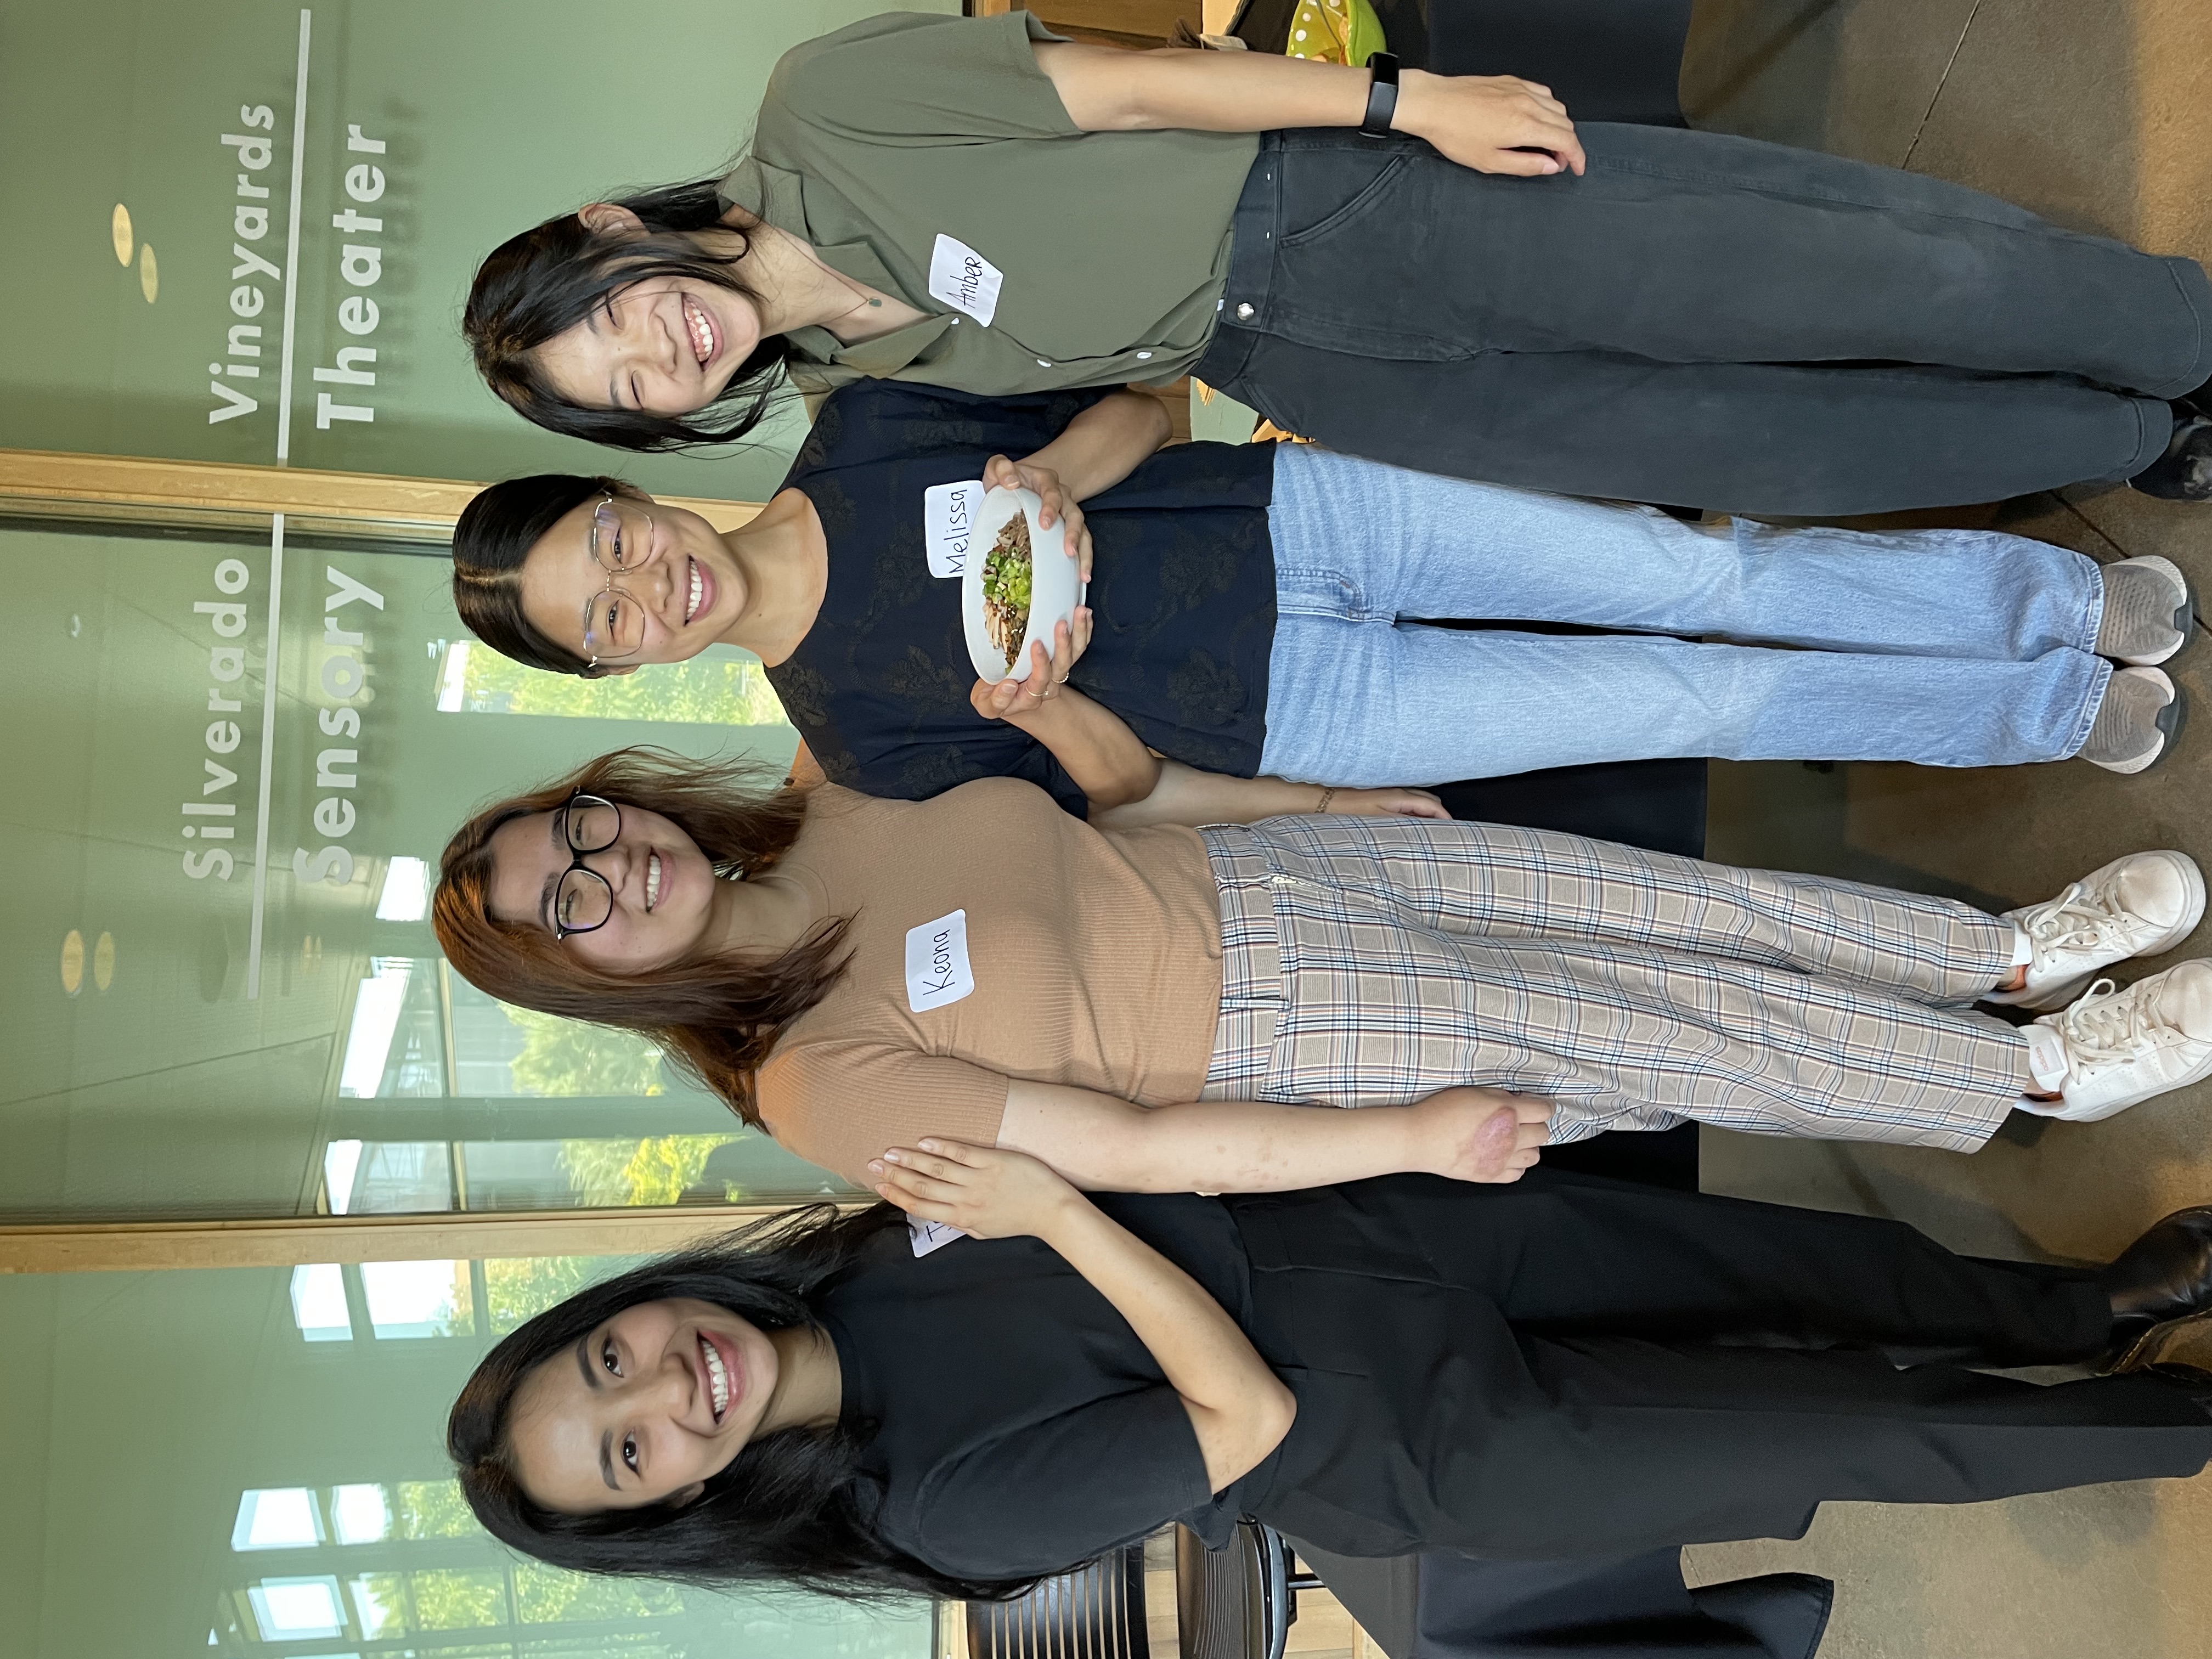 “UPNoodle" creators share samples of their product. Students (L-R): Joelle Nguyen, Keona Kanthatham, Melissa Huang and Amber Sun.